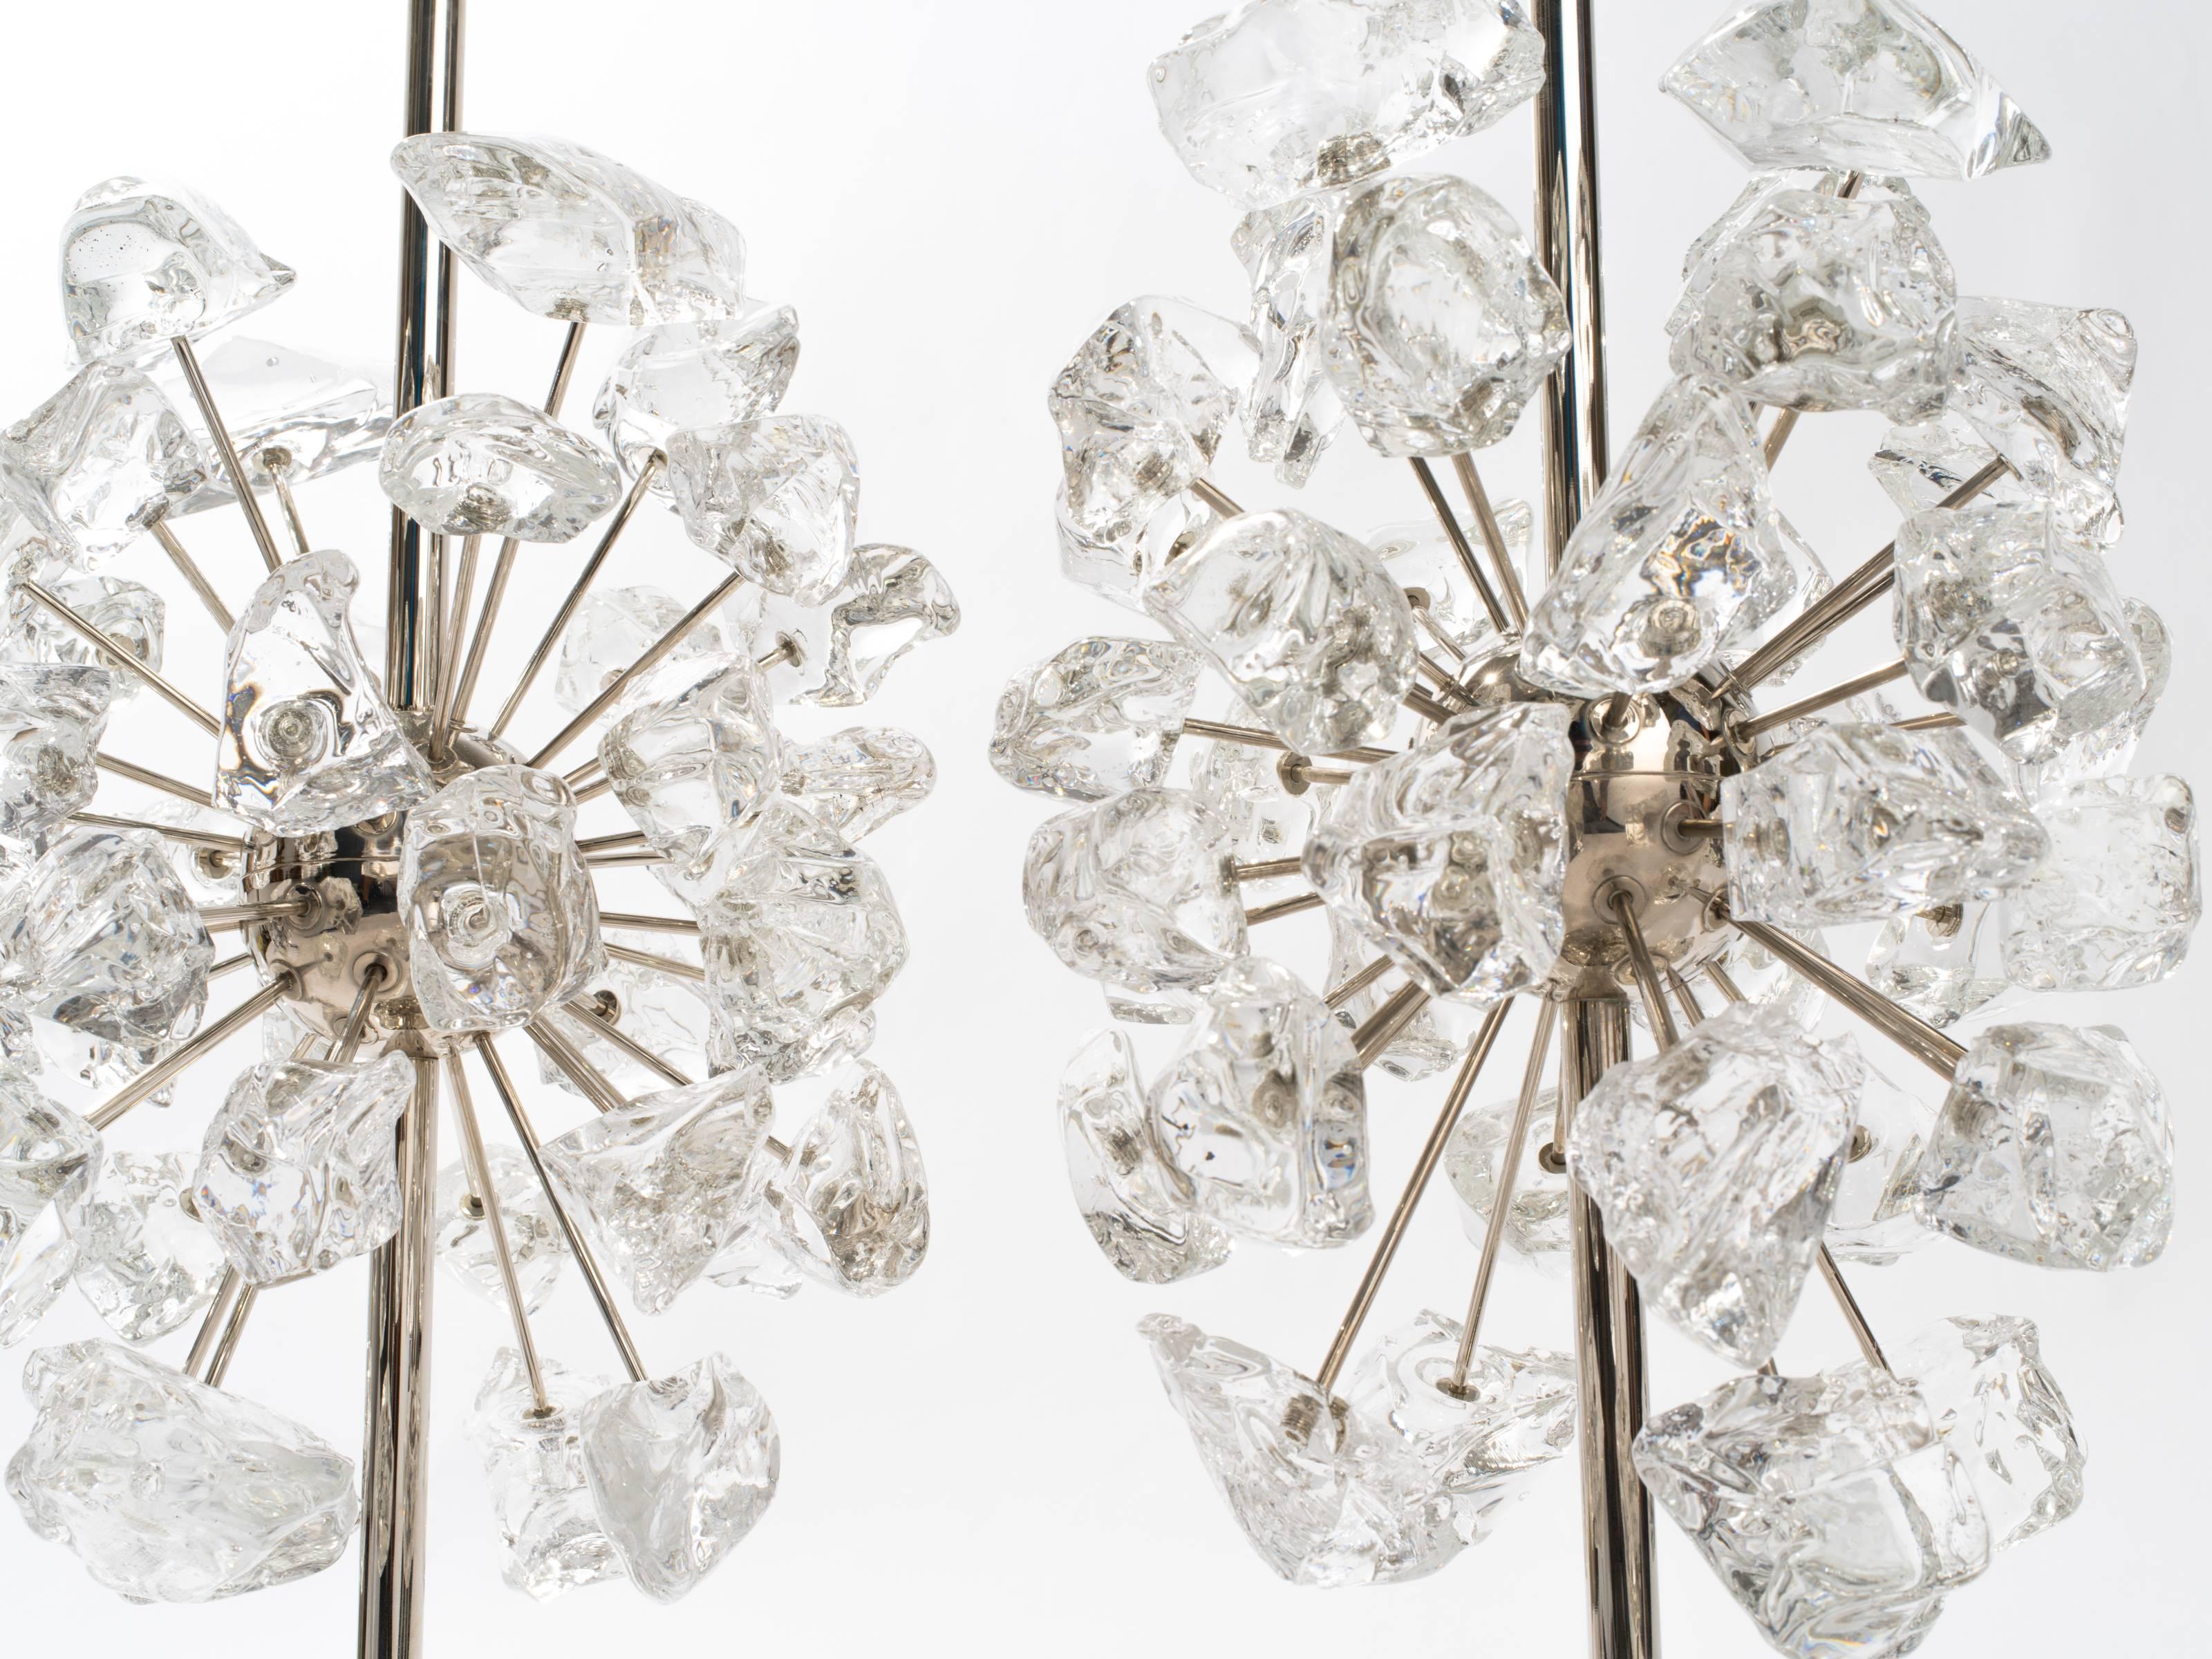 Pair of hand torched glass Sputnik lamps.
Solid nickel-plated brass hardware with a three-way switch.
One of a kind.